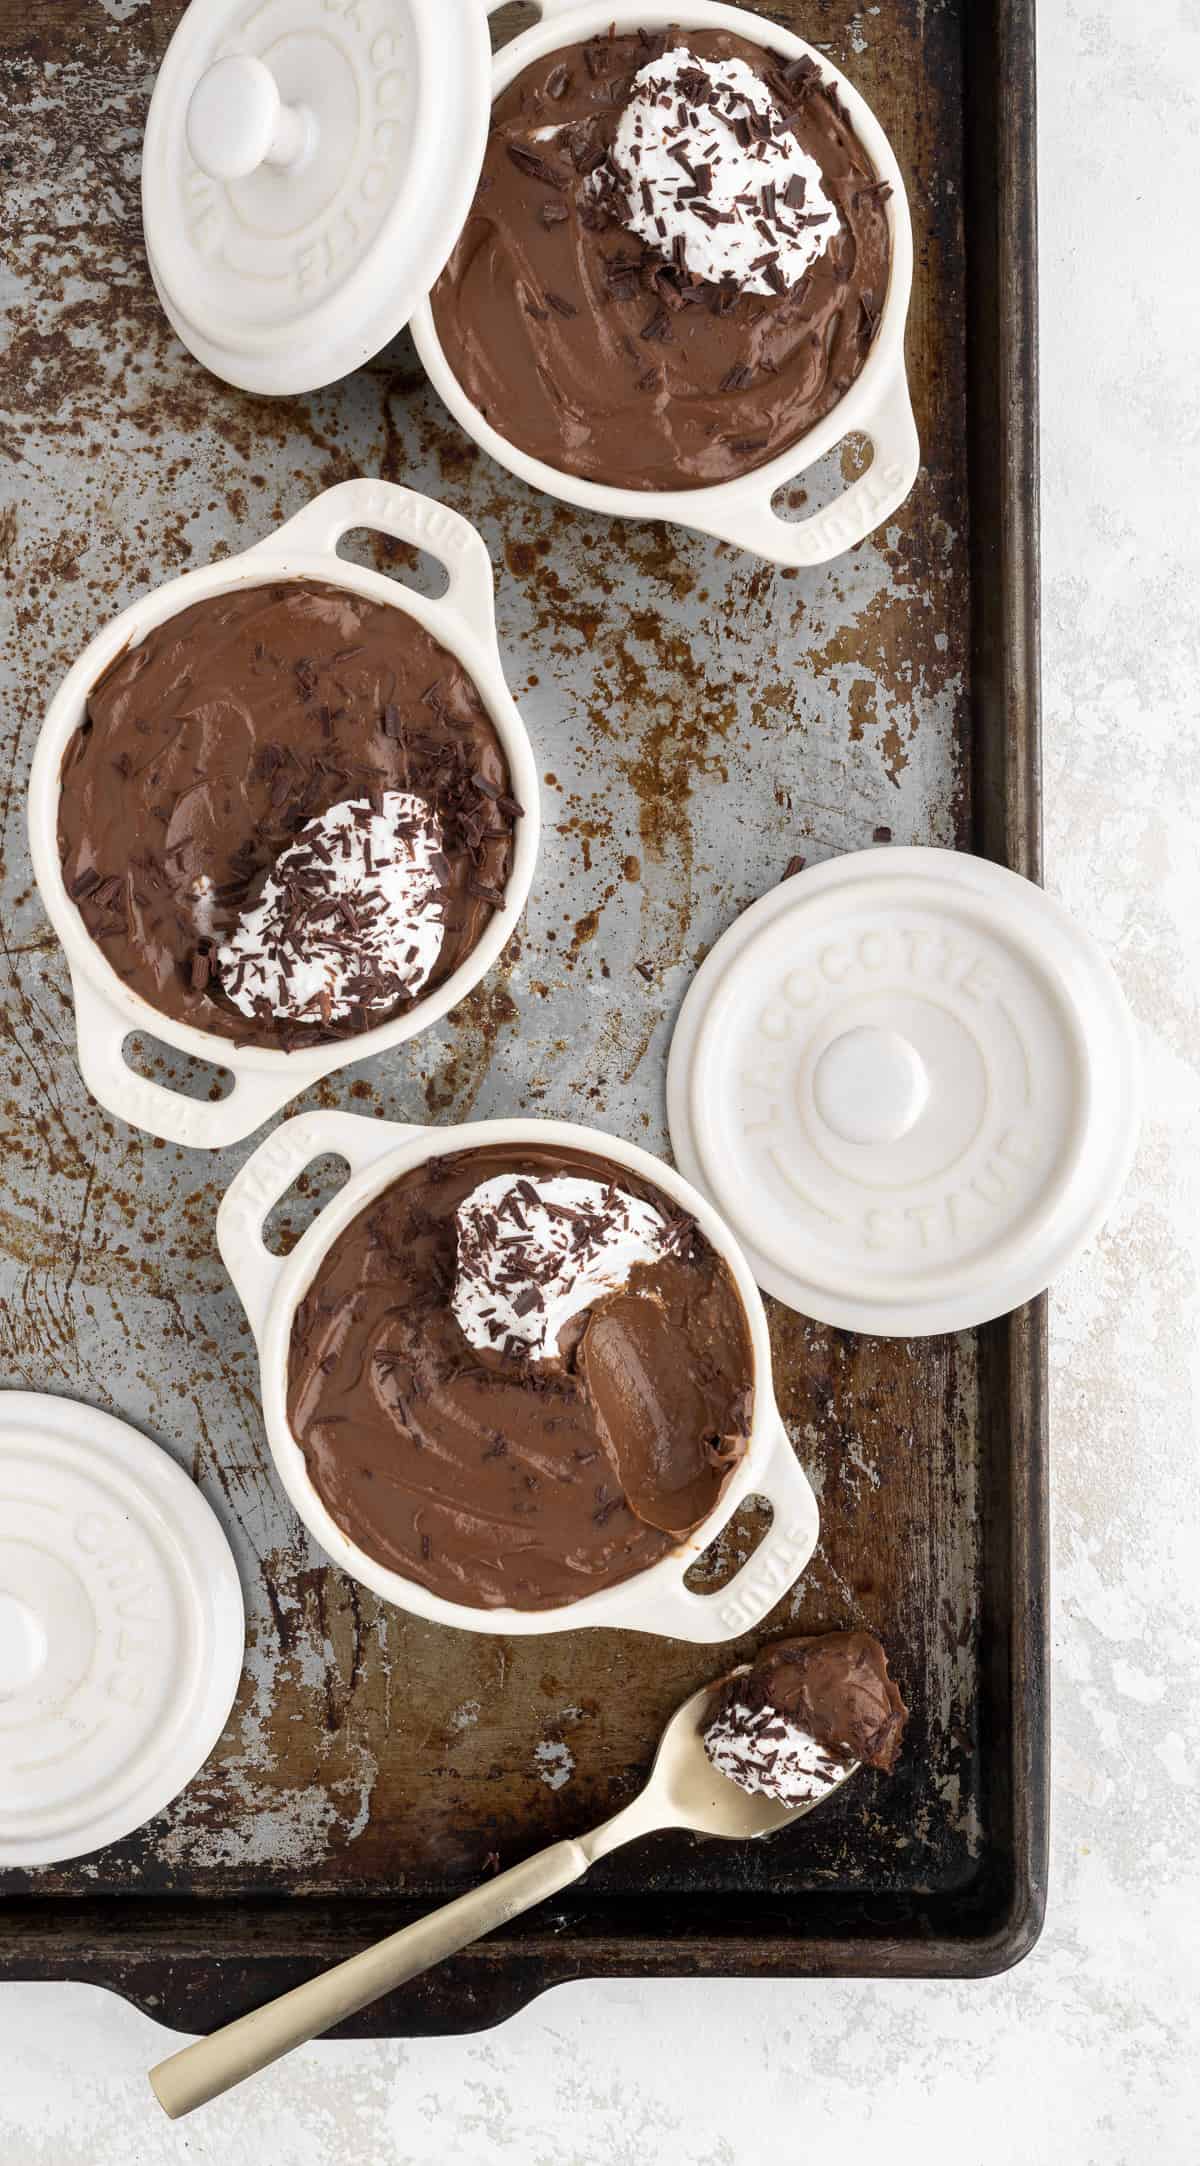 chocolate avocado mousse with a scoop of coconut cream on top divided into 3 white ramekins